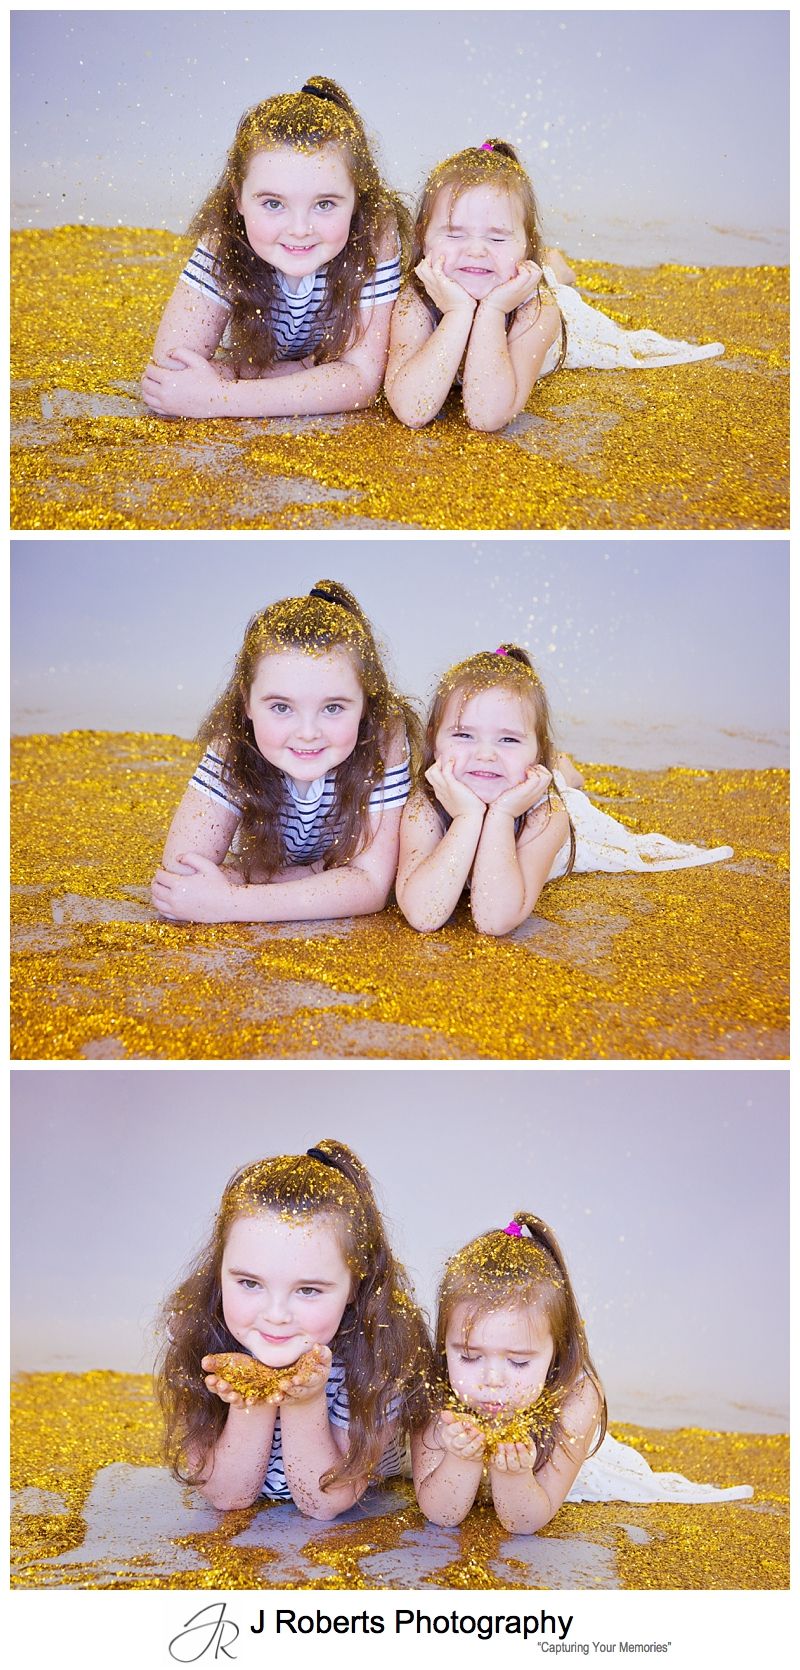 Glitter Mini Portrait Photography Sessions Sydney Lot of Fun with Glitter